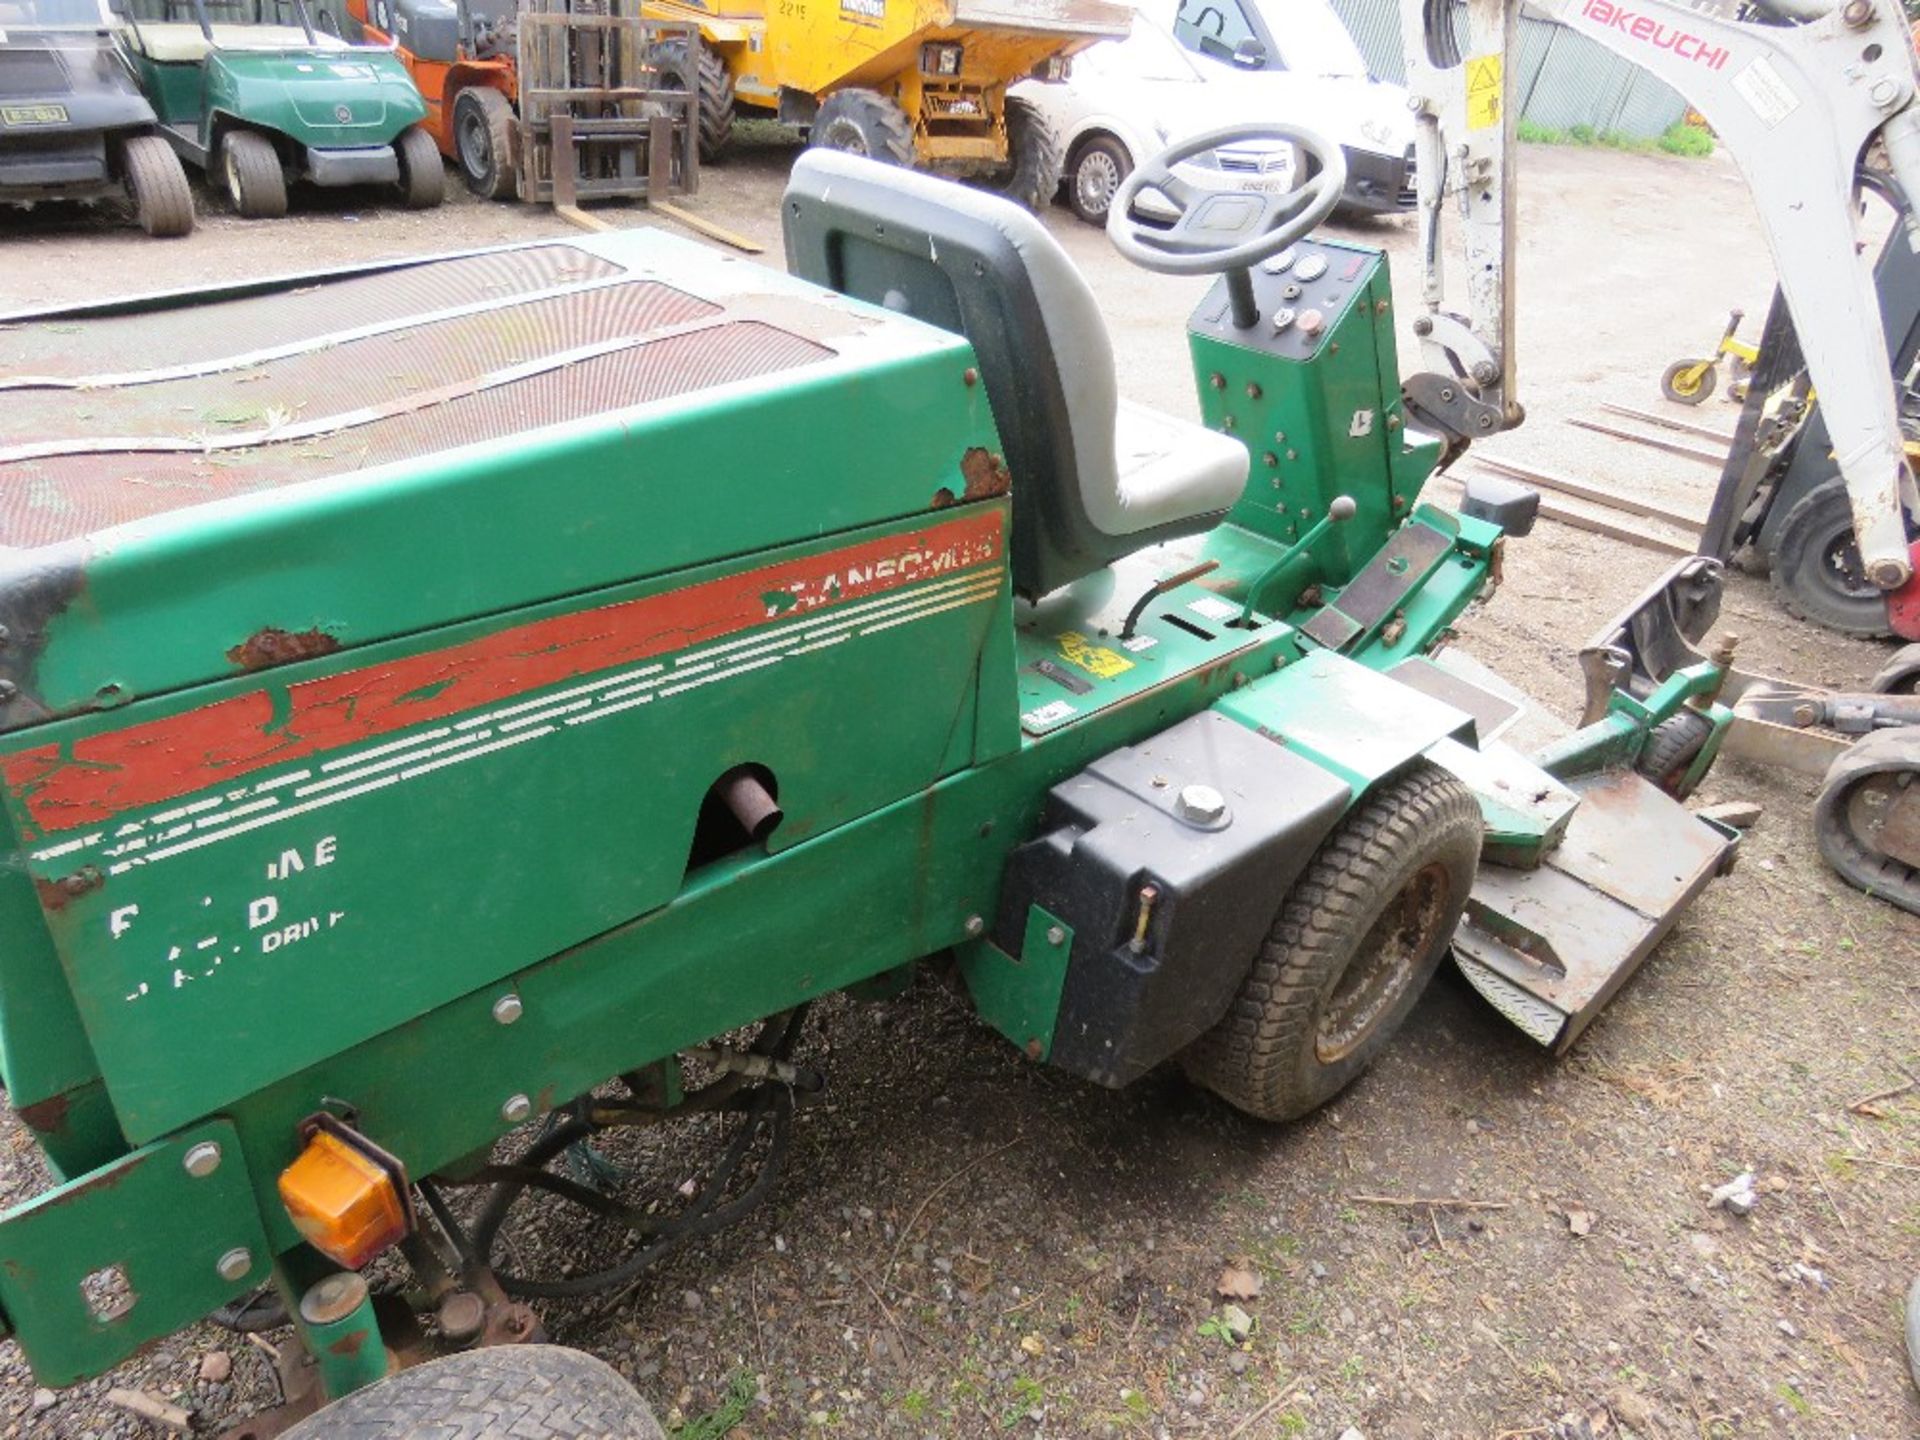 RANSOMES FRONTLINE 728D OUTFRONT RIDE ON MOWER. 4WD. 6FT CUT APPROX. WHEN TESTED WAS SEEN TO RUN AND - Image 6 of 8